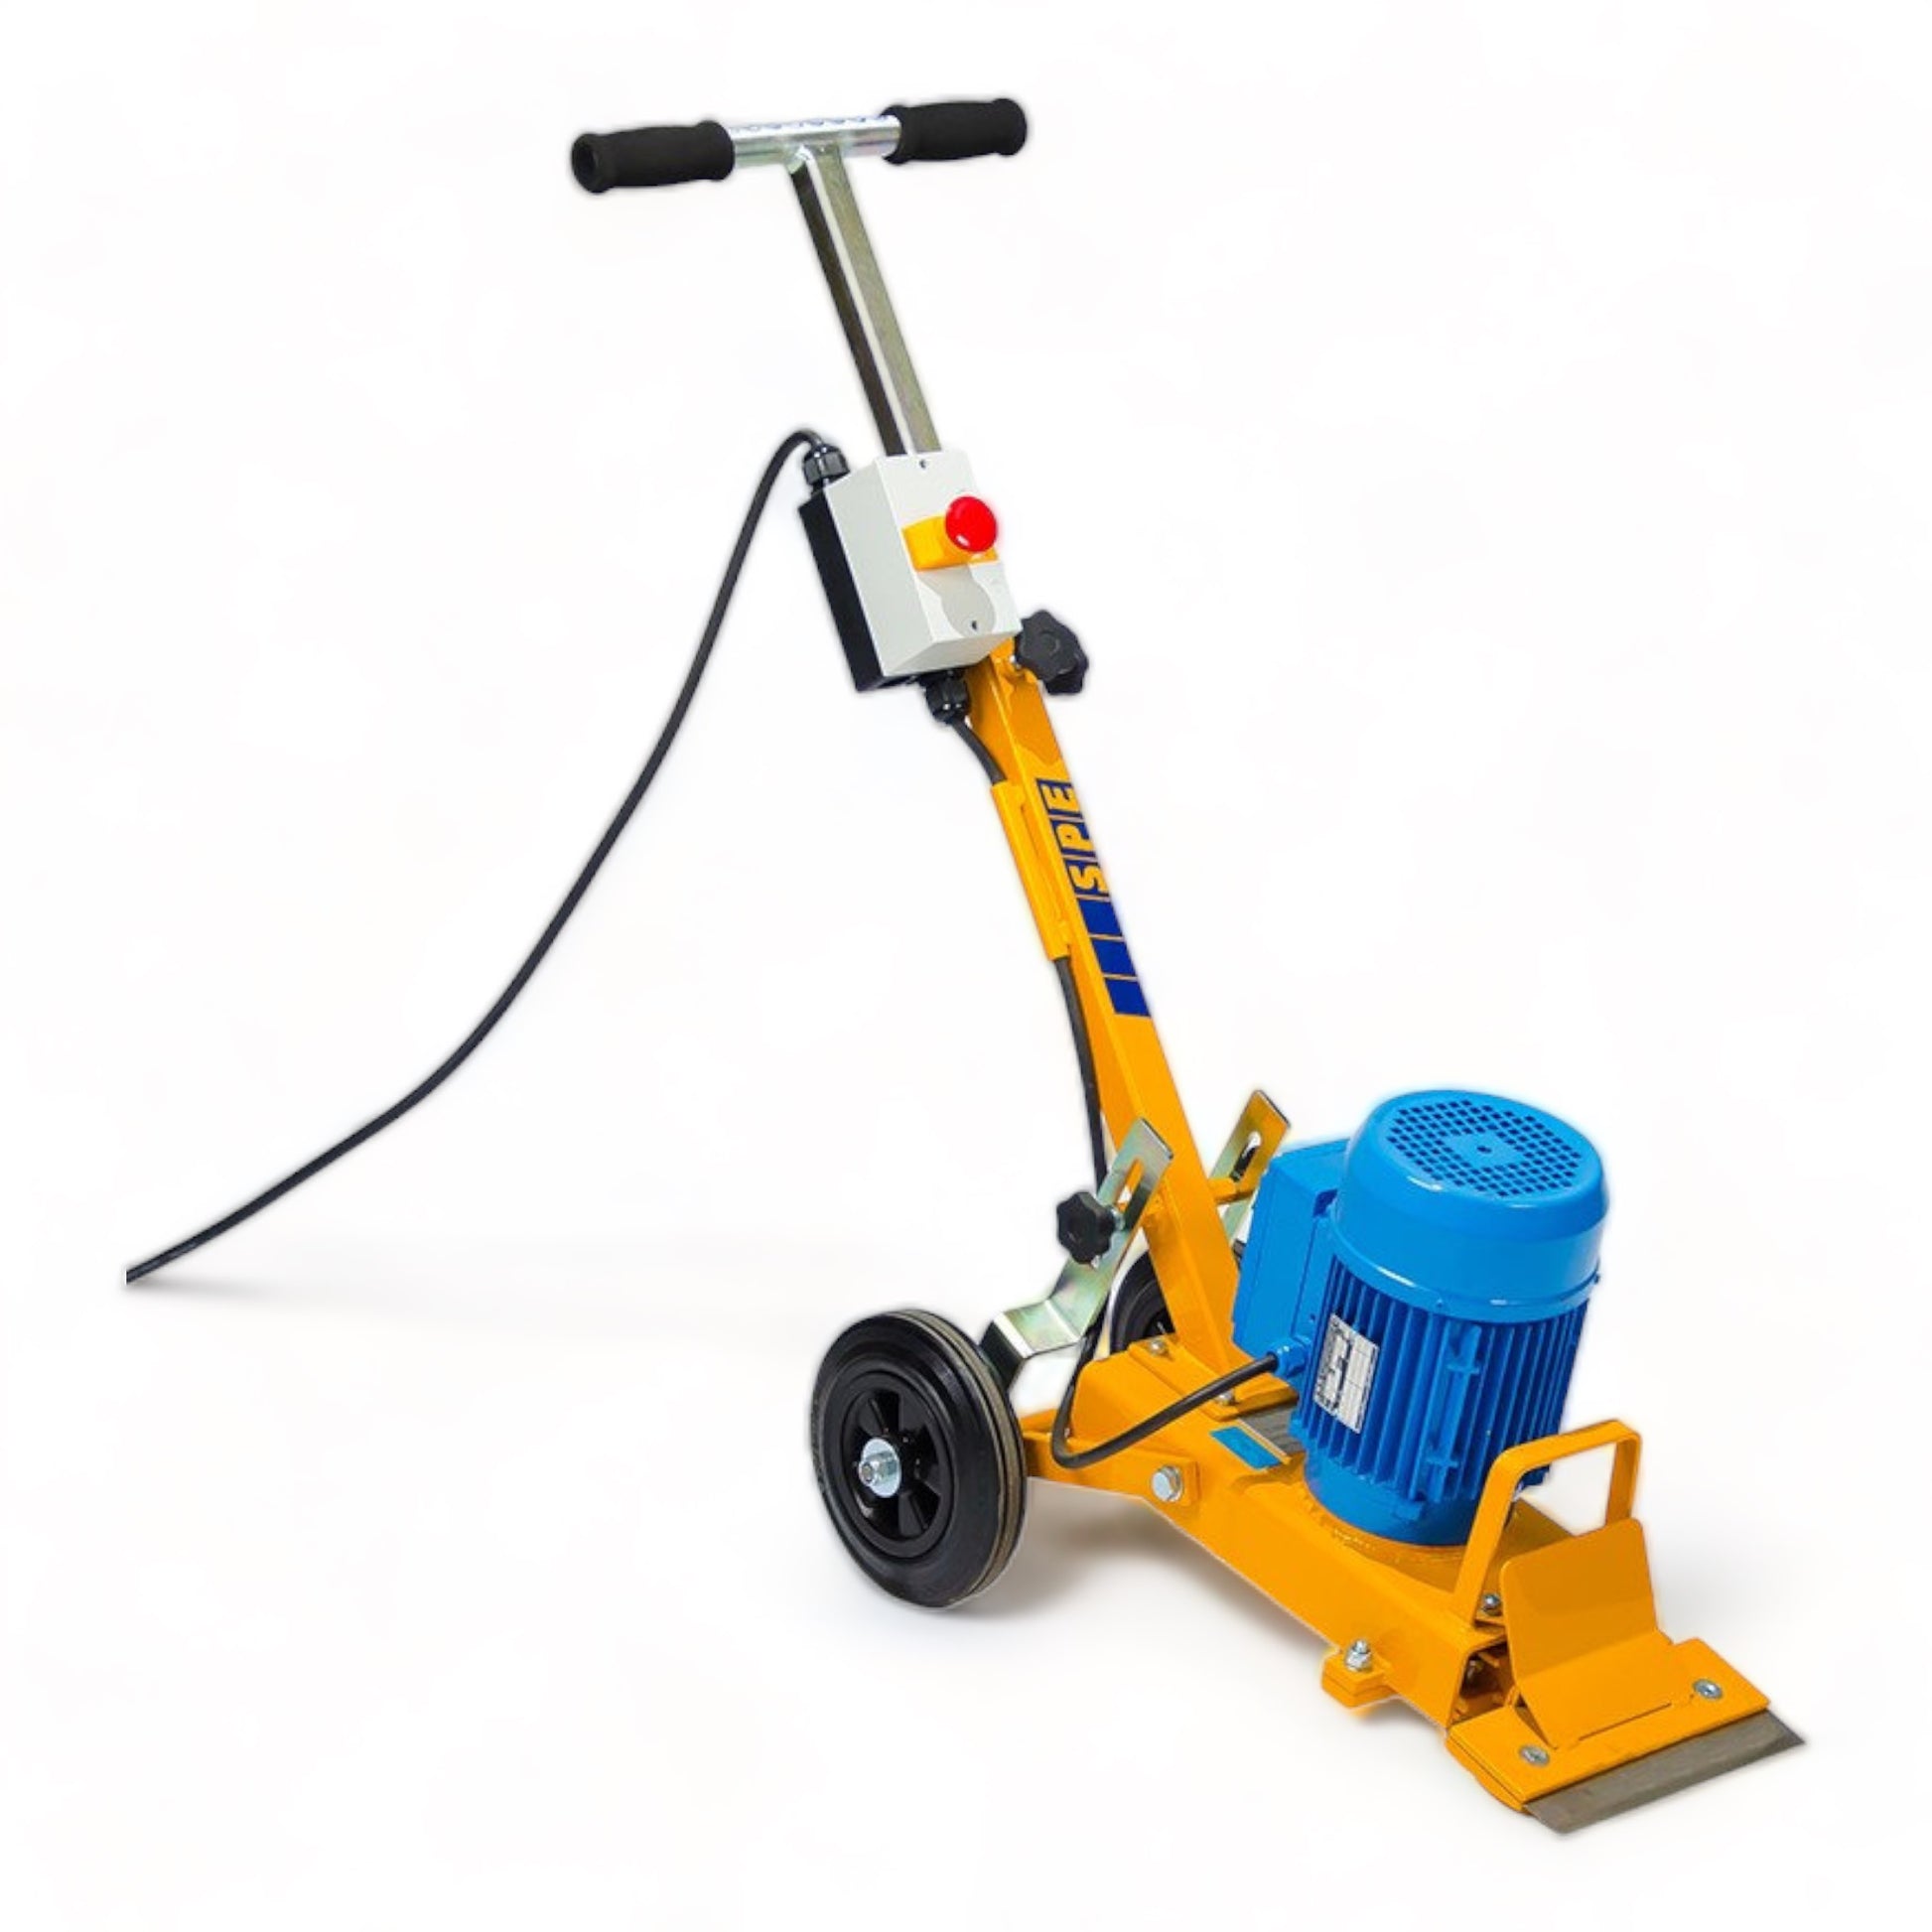 MS230 Bartell Floor And Tile Removal Multi-stripper